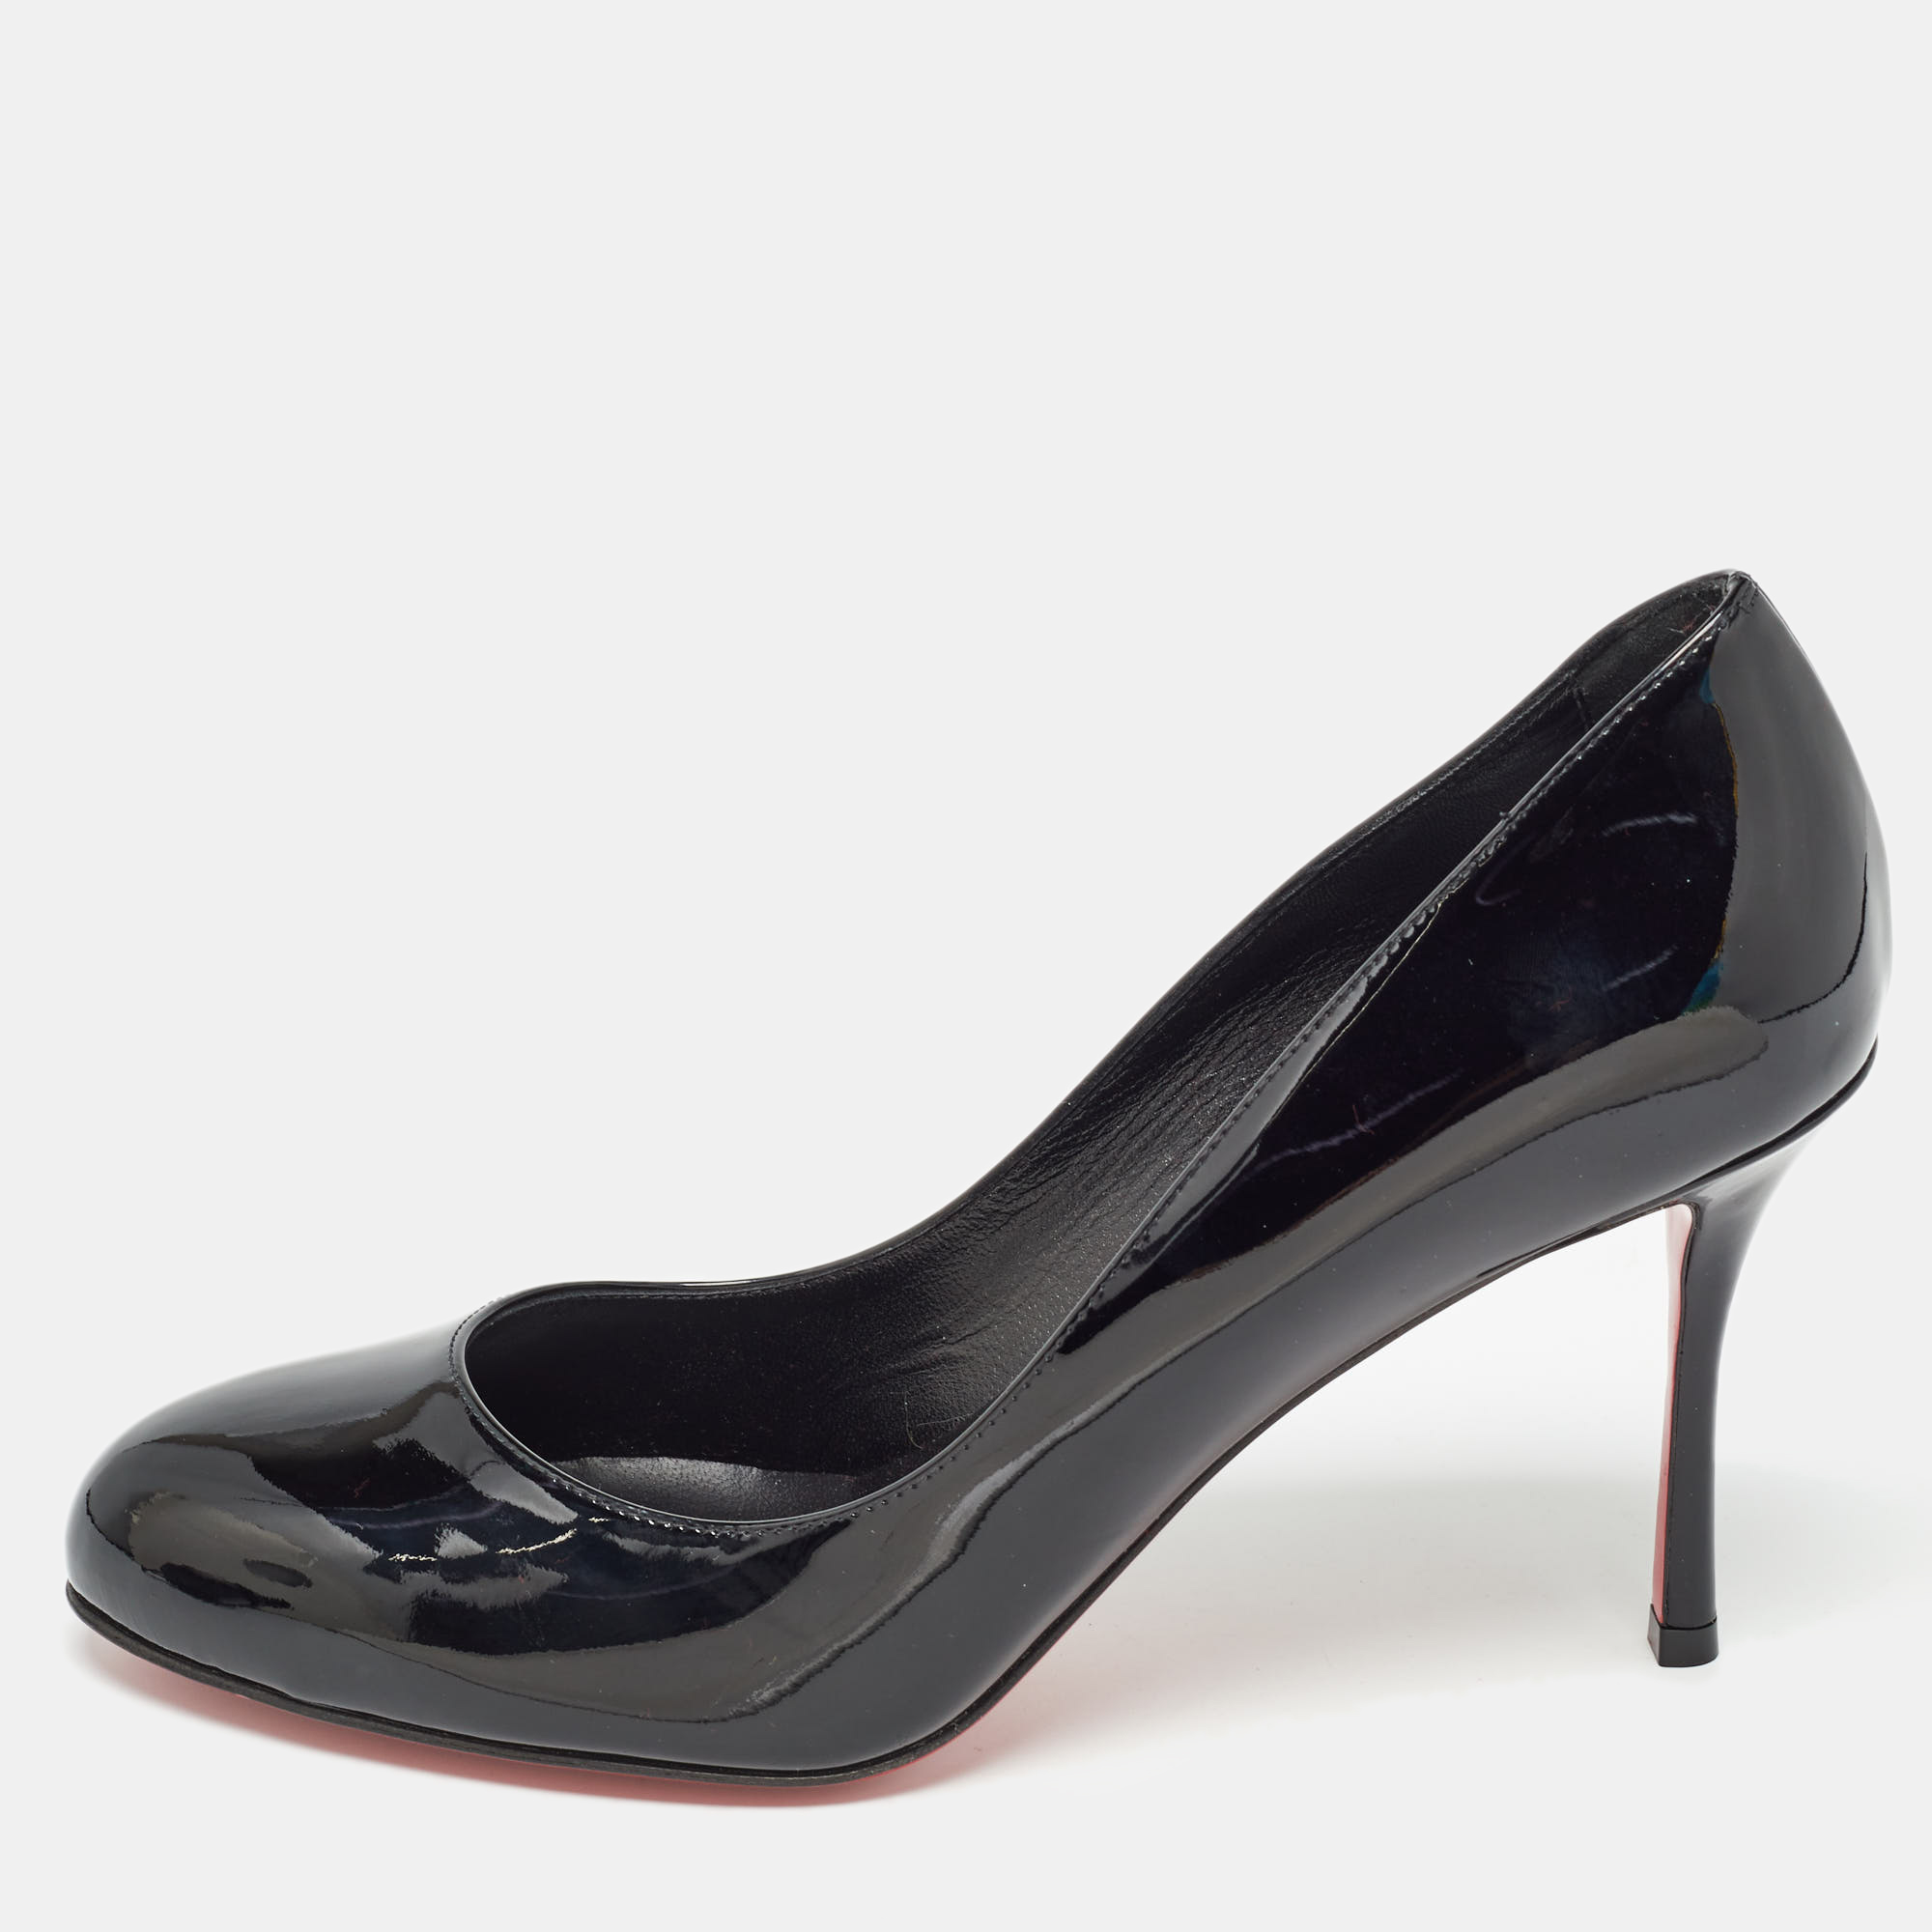 Christian louboutin black patent leather dolly pumps size 38.5